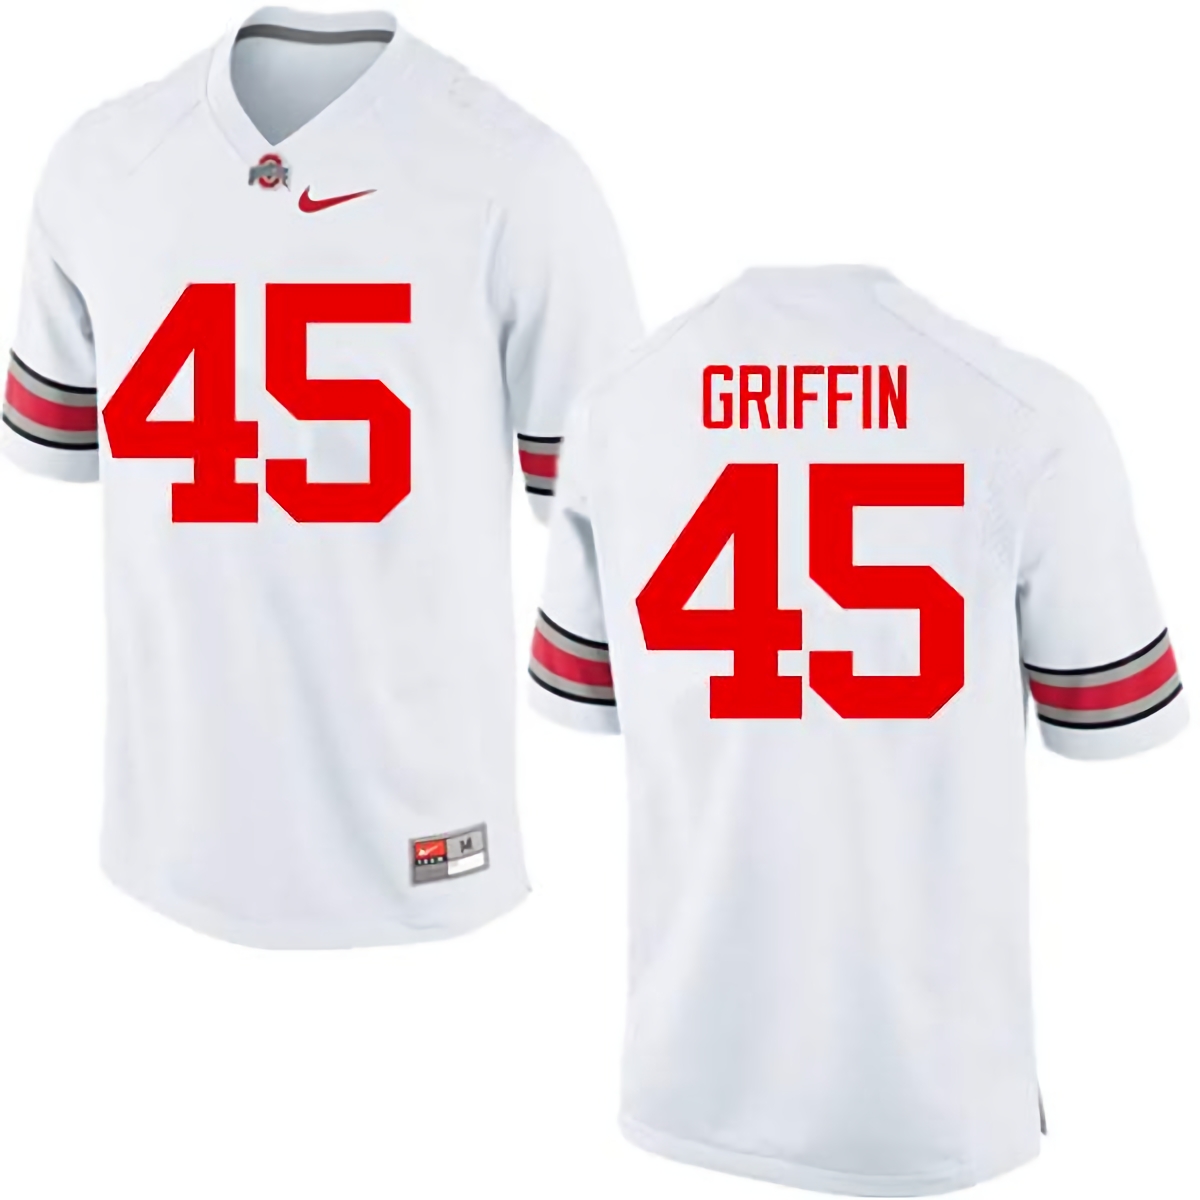 Archie Griffin Ohio State Buckeyes Men's NCAA #45 Nike White College Stitched Football Jersey LAF1756DJ